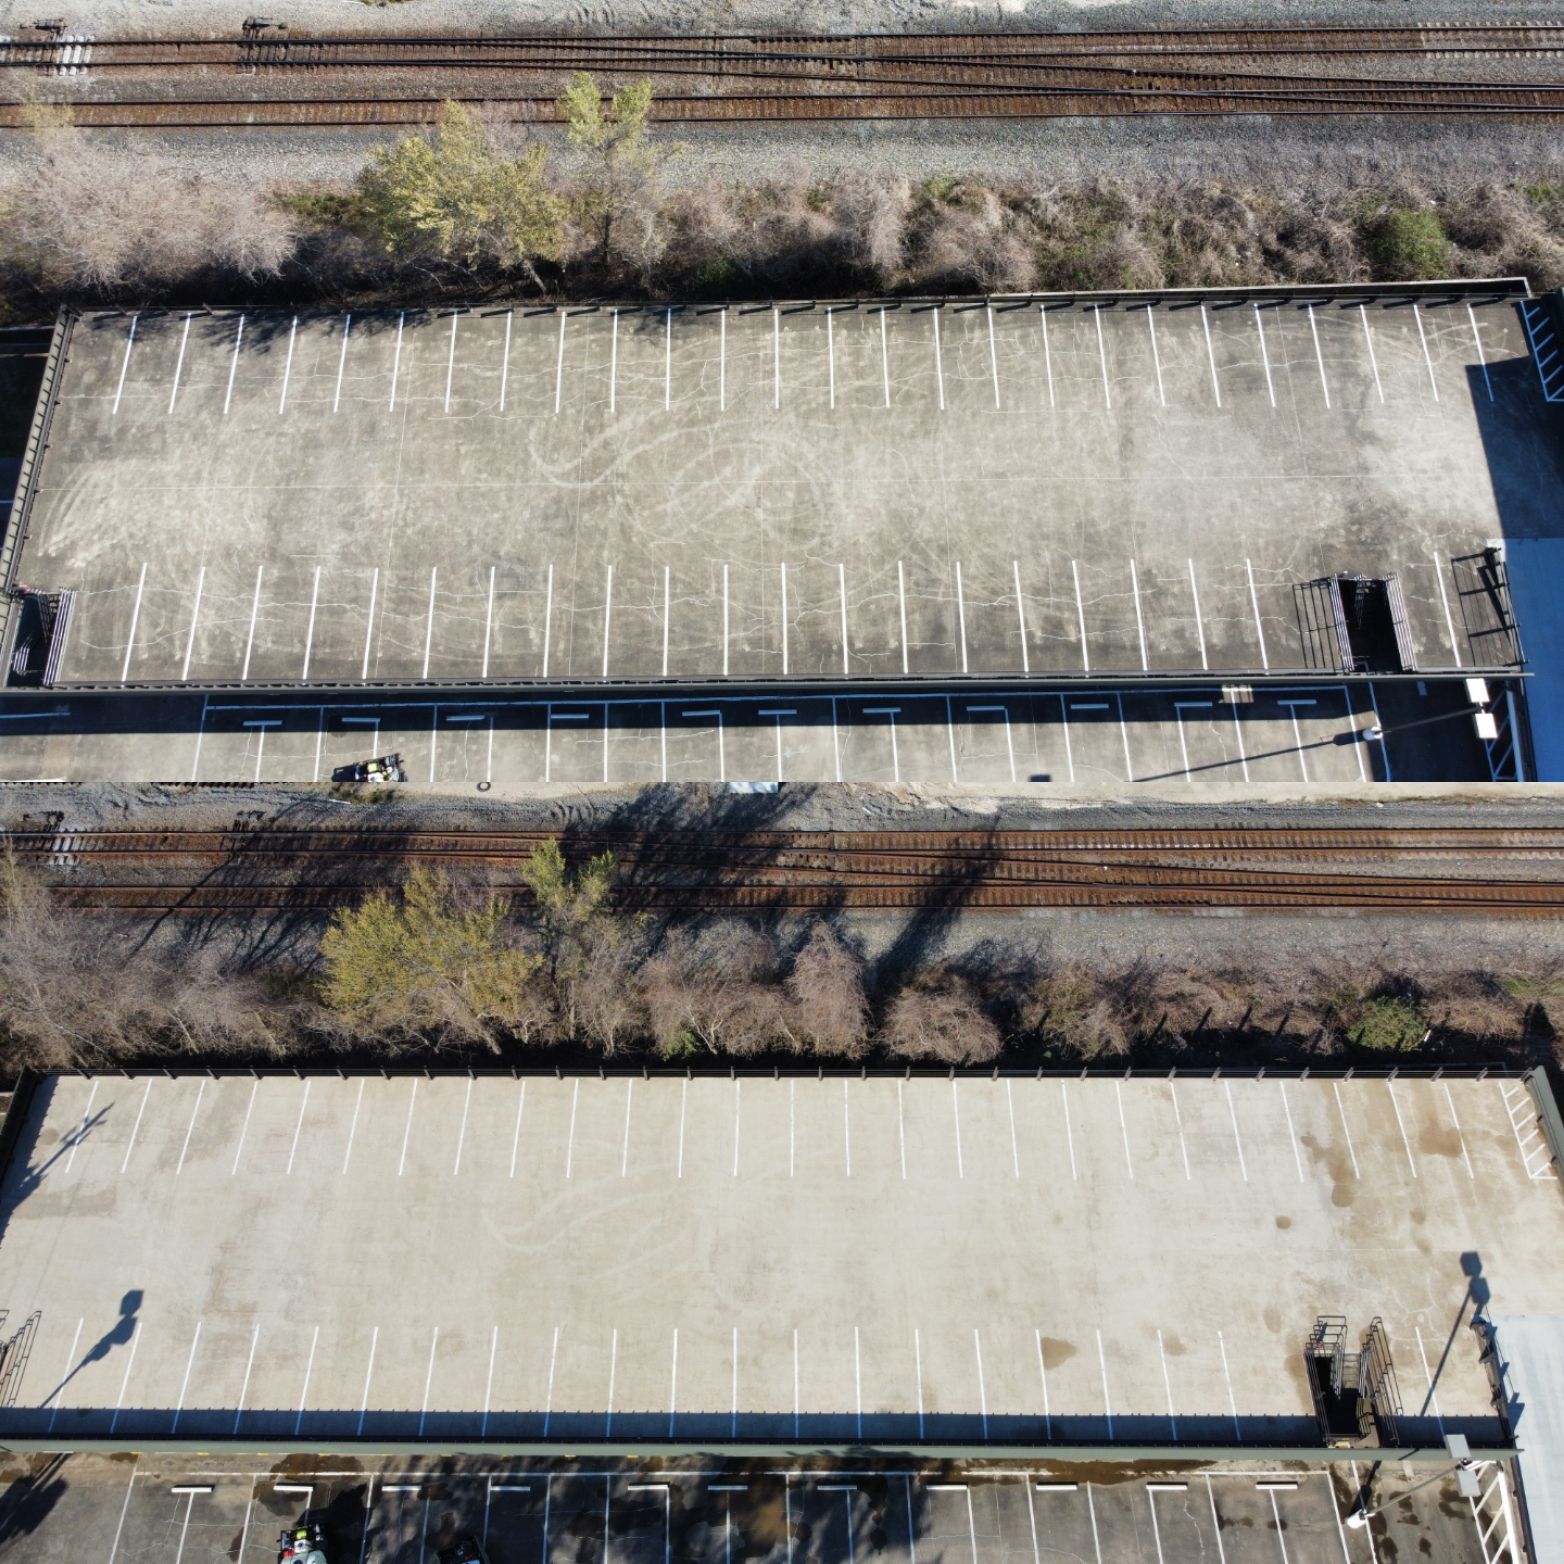 an aerial view of a parking lot next to a train track